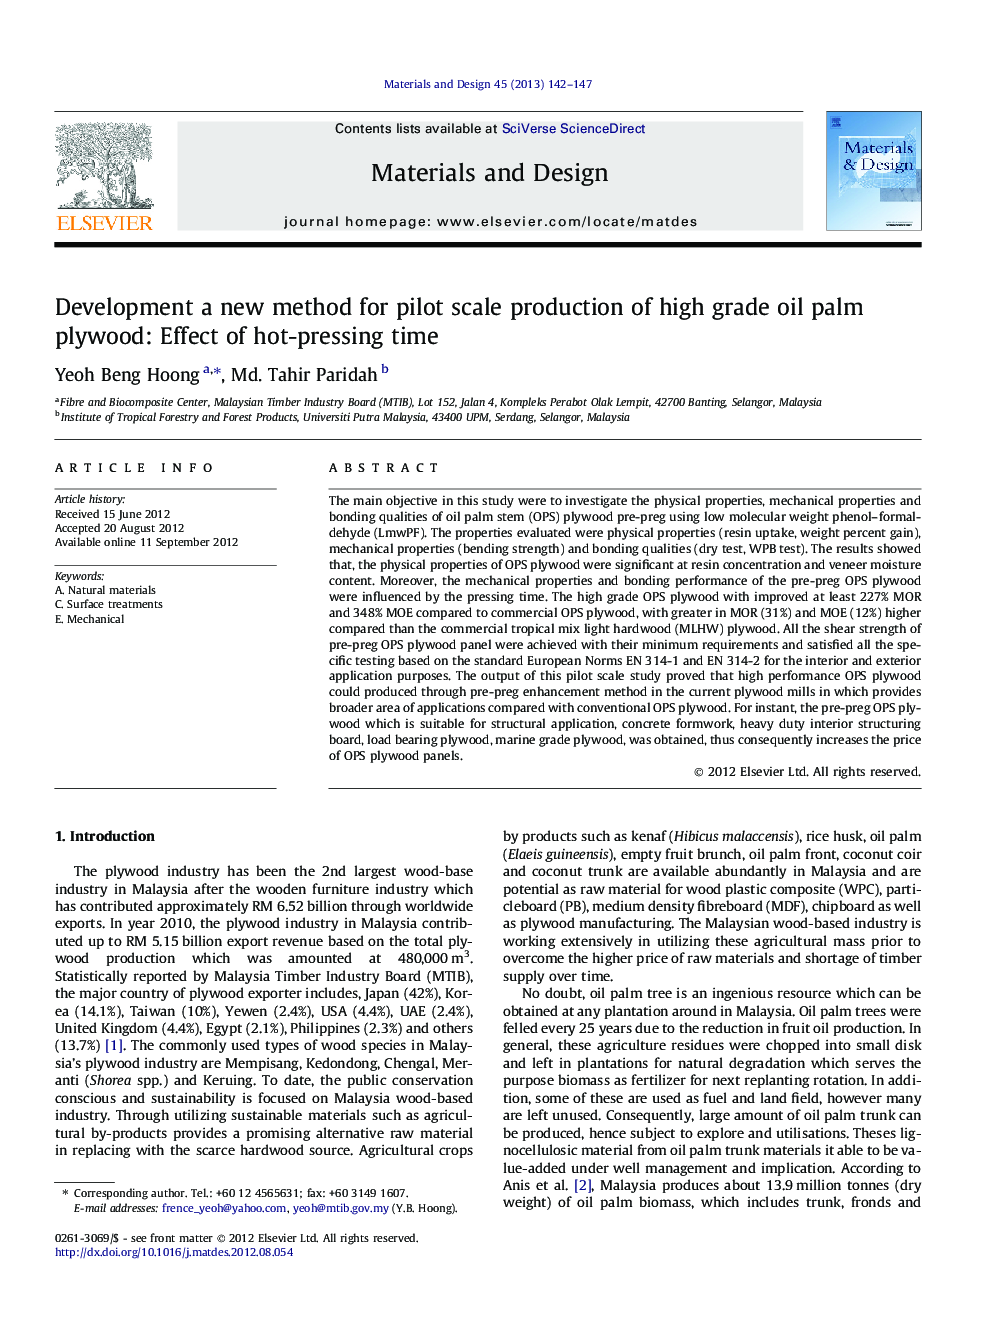 Development a new method for pilot scale production of high grade oil palm plywood: Effect of hot-pressing time